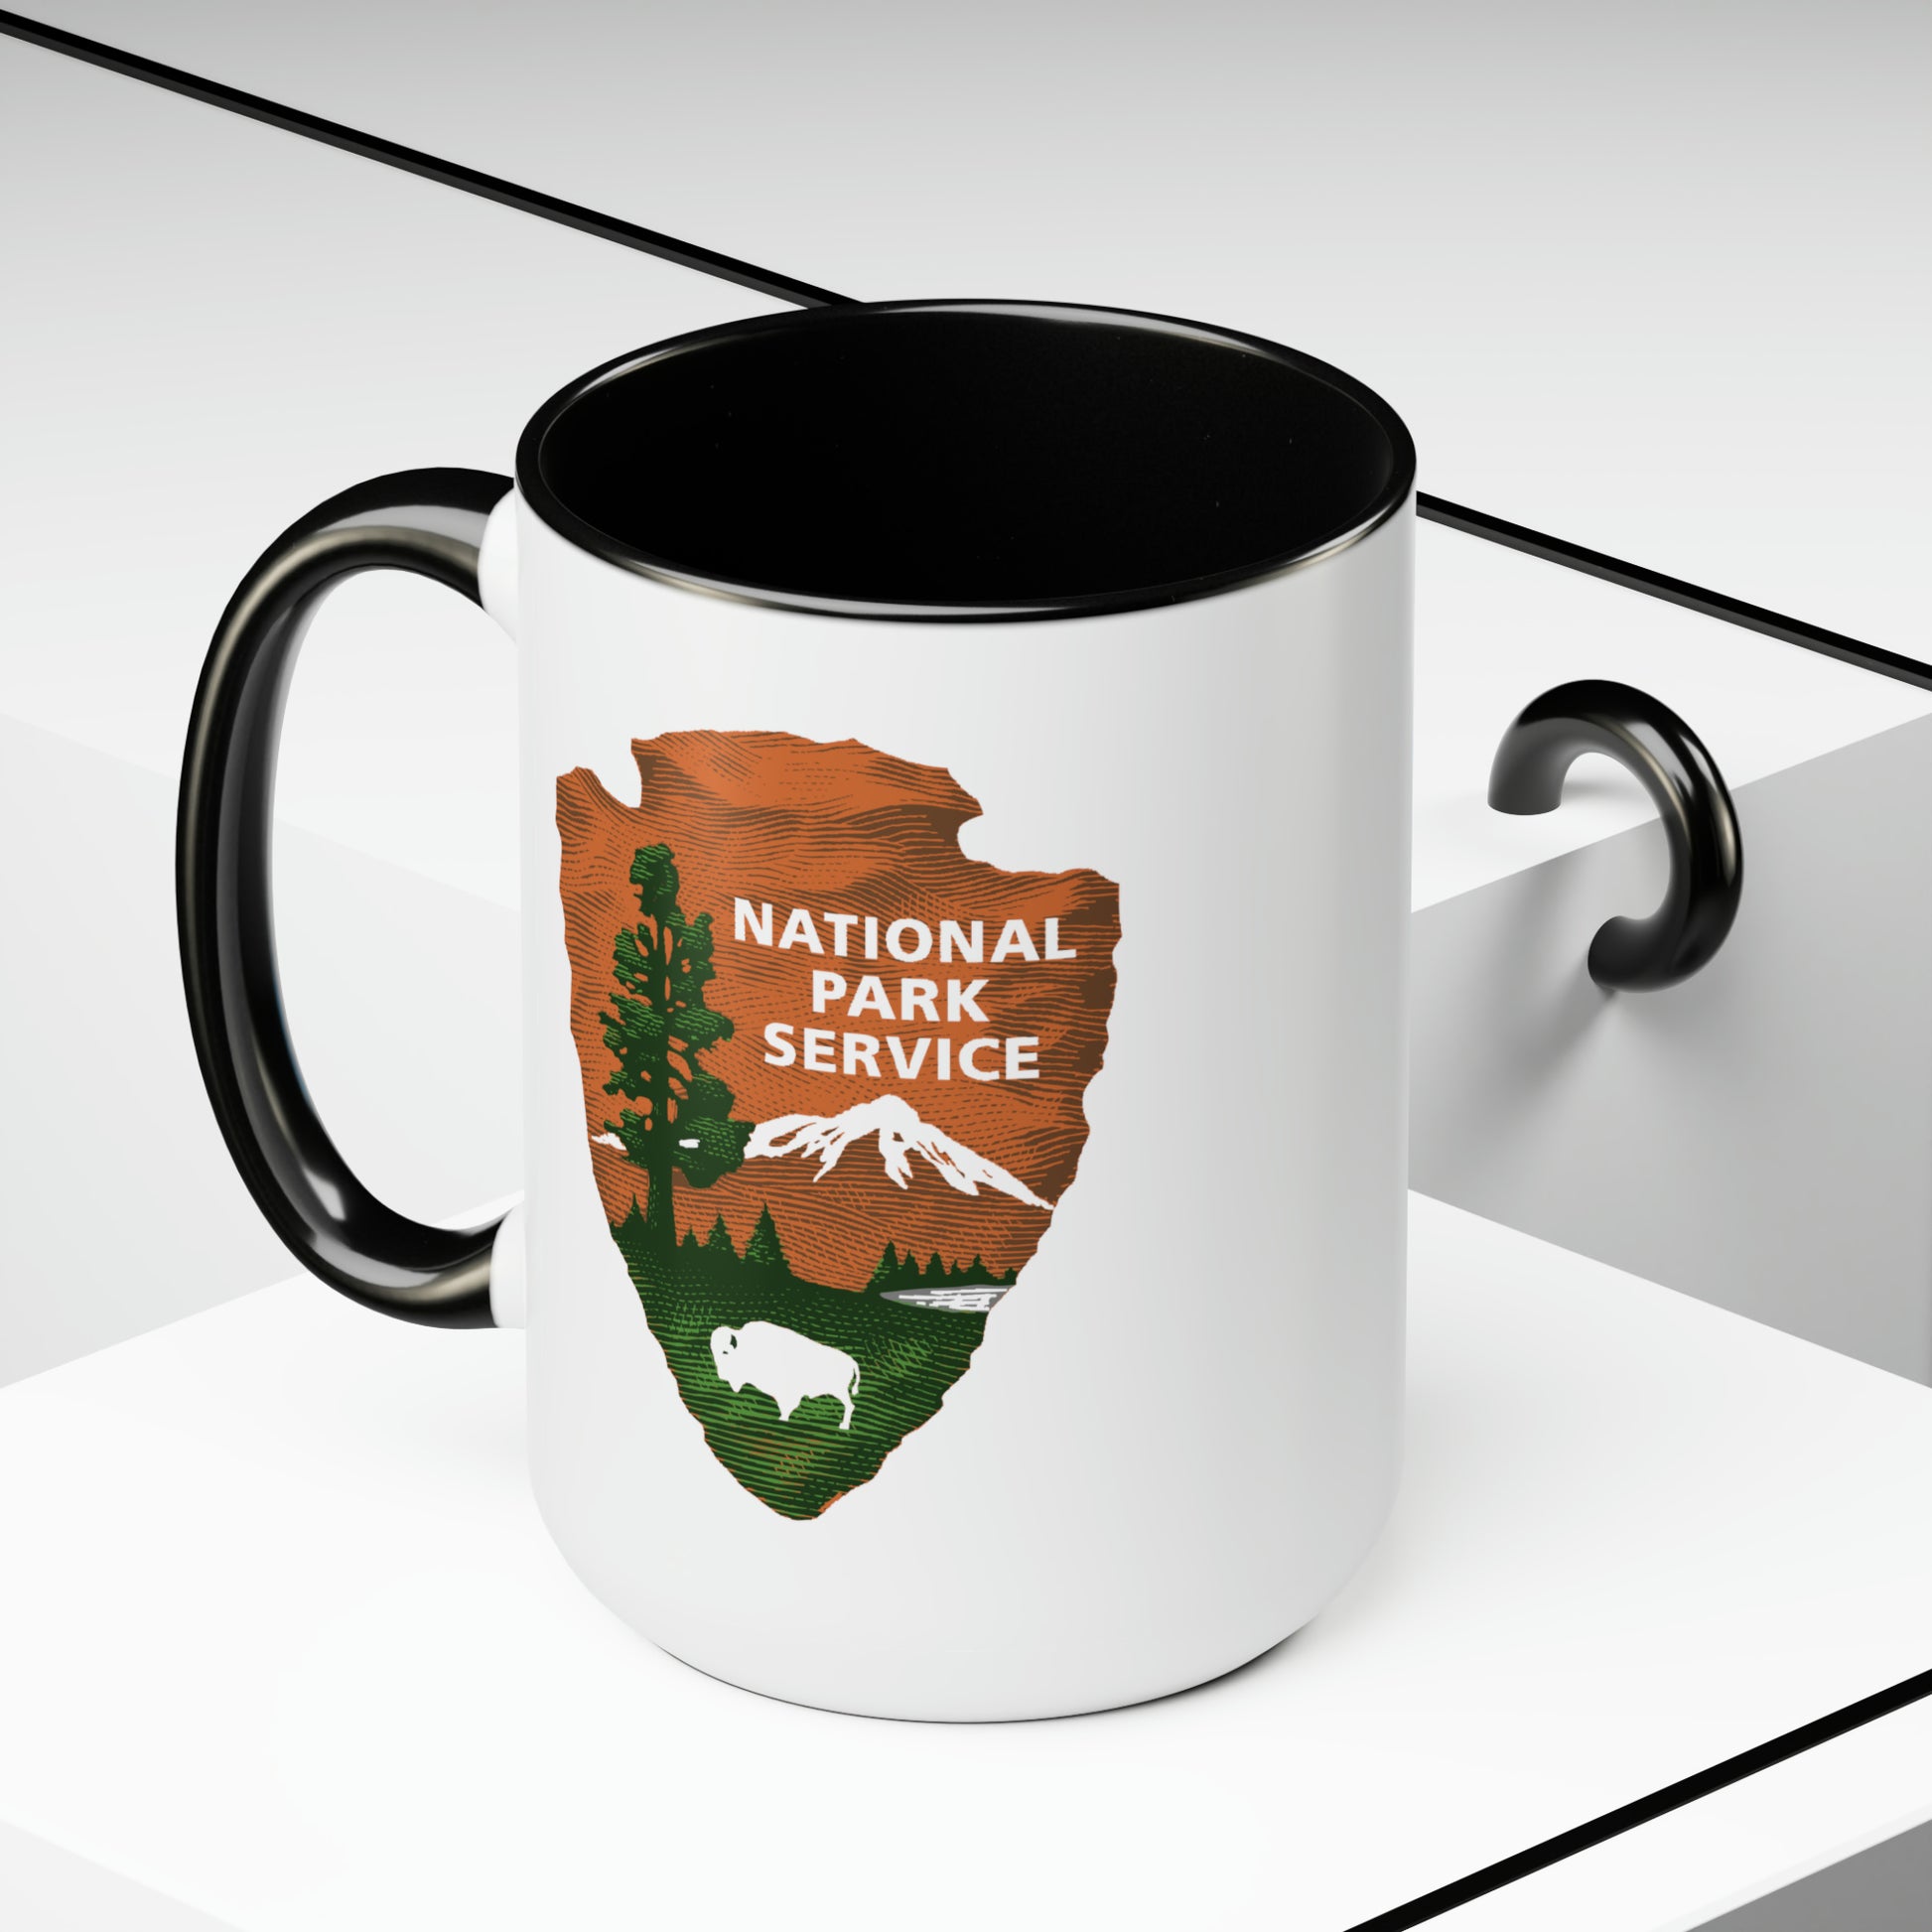 National Park Service Coffee Mug - Double Sided Black Accent White Ceramic 15oz by TheGlassyLass